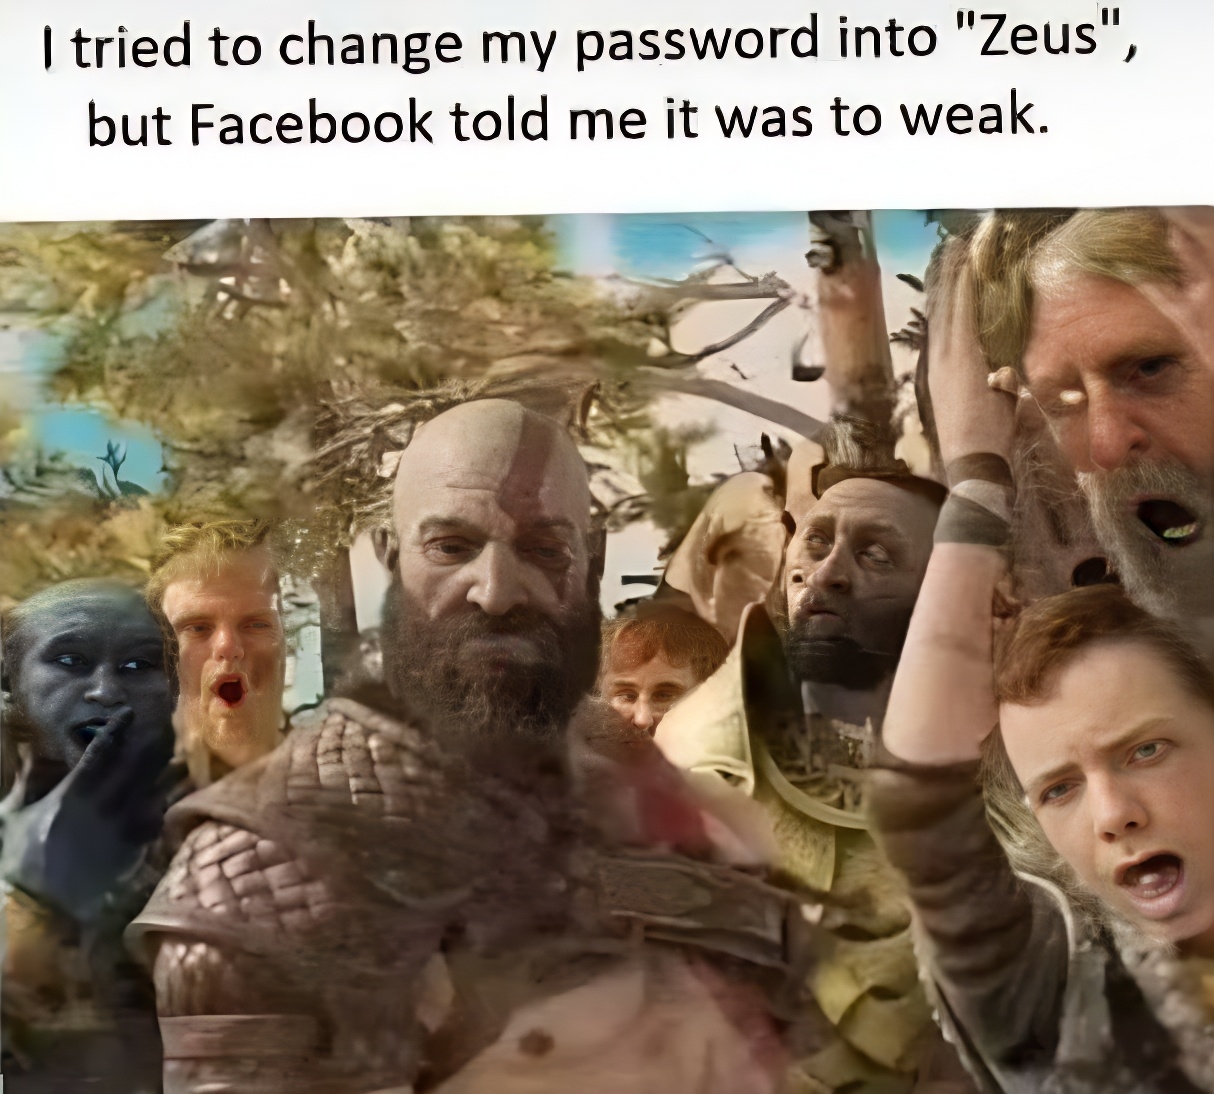 gaming memes - tried to change my password to zeus - I tried to change my password into "Zeus", but Facebook told me it was to weak.